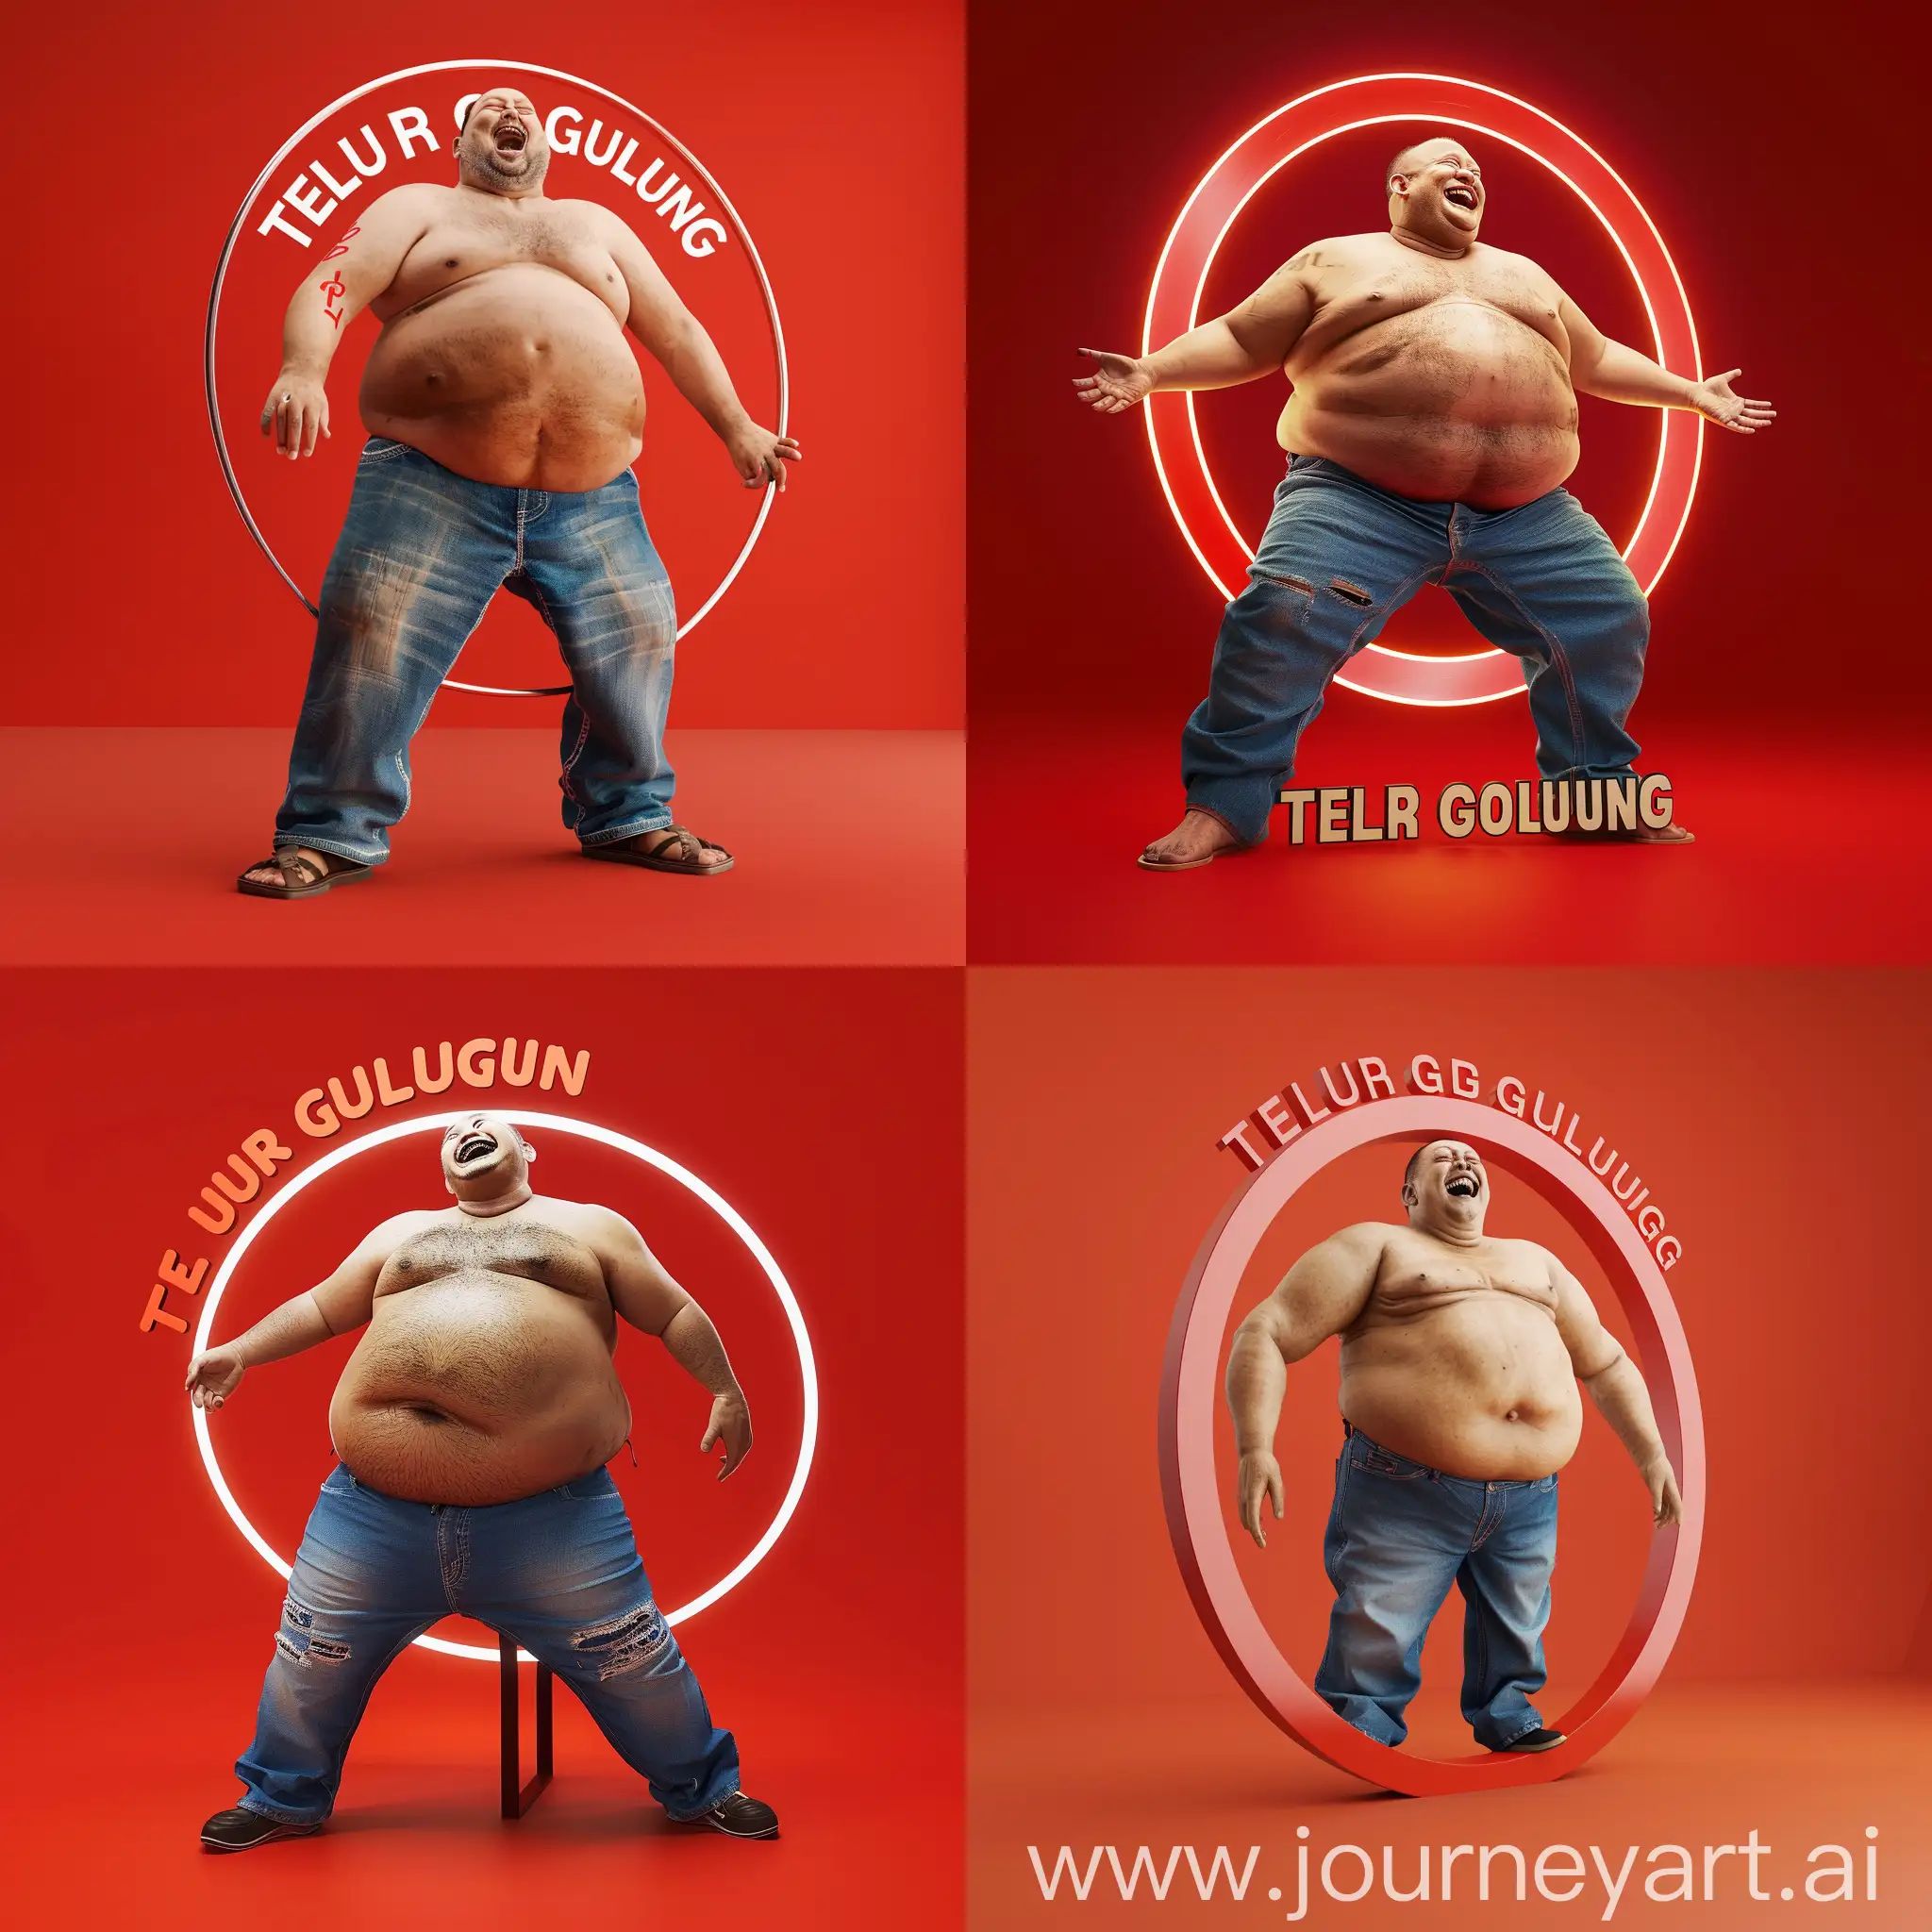 Joyful-Laughter-Realistic-3D-Image-of-a-Cheerful-Overweight-Man-in-TELUR-GULUNG-Circle-Frame-on-Vibrant-Red-Background